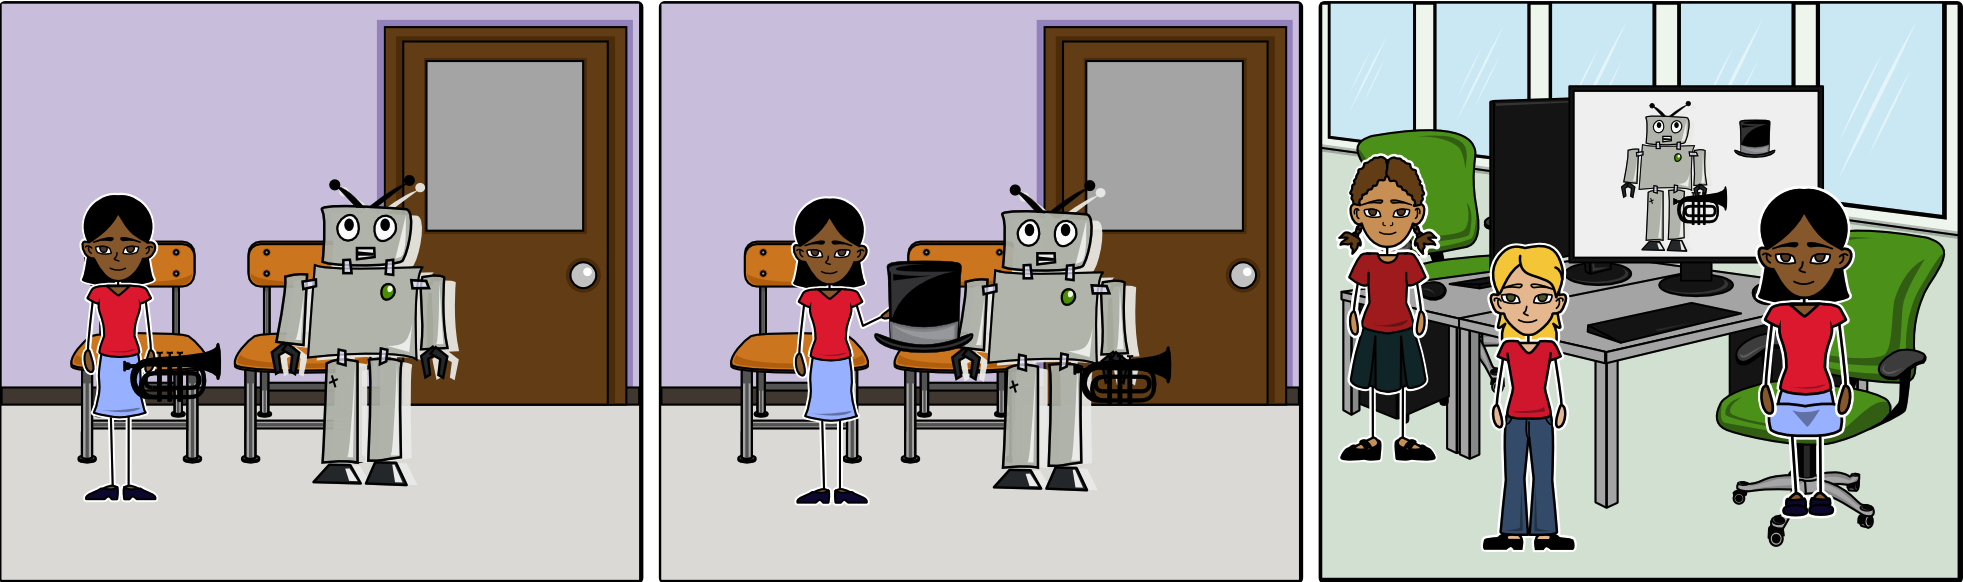 A three-panel storyboard-style comic. A girl is handing a robot a trumpet. A girl is handing a robot a top hat. The scene pans back to reveal that the girl is actually working on a computer in a lab